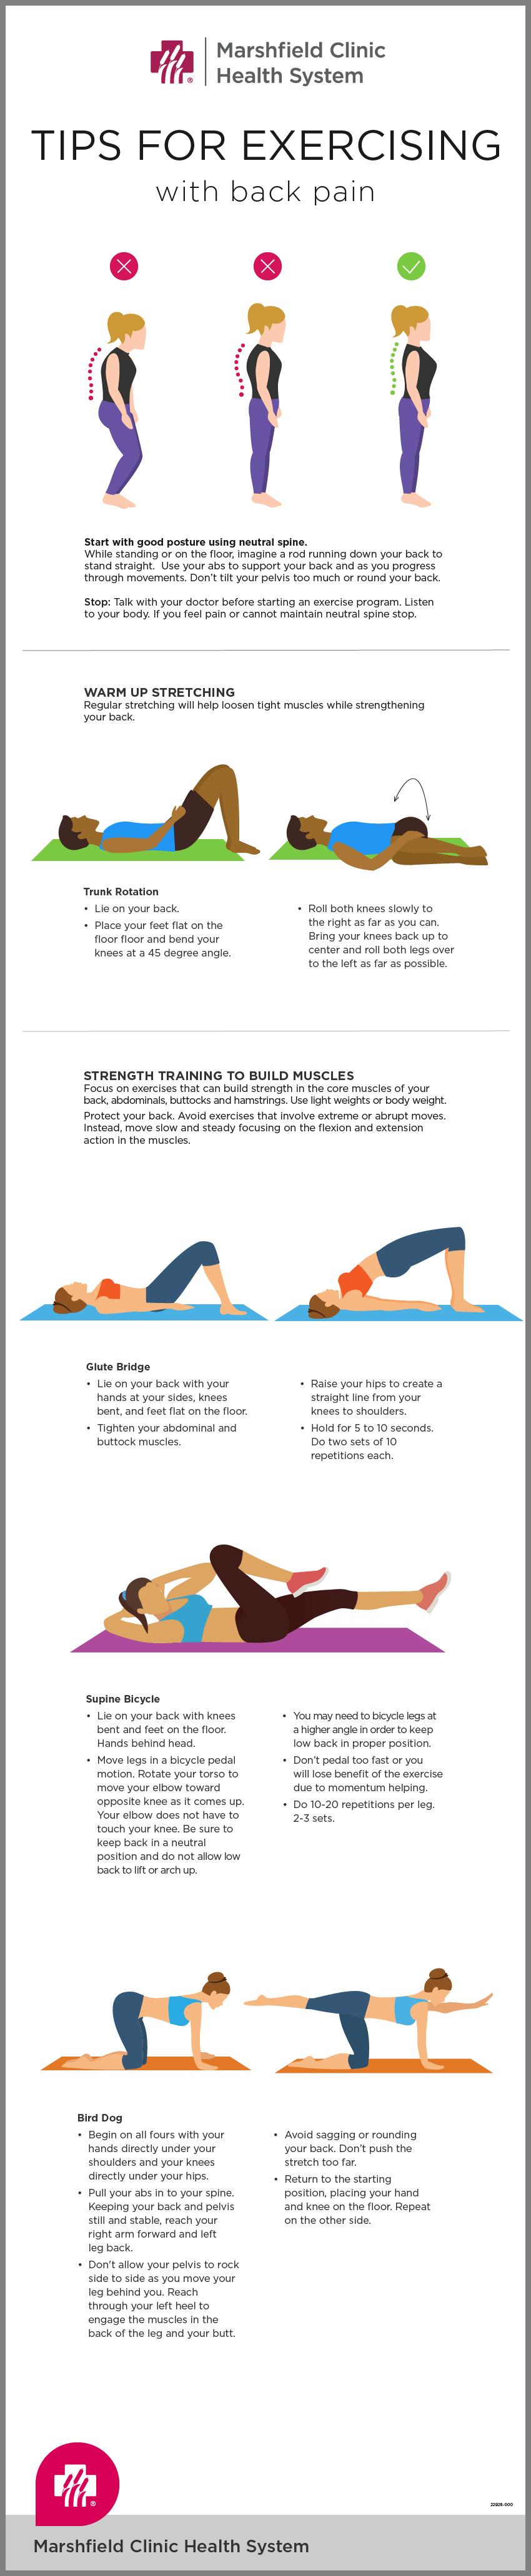 infographic for tips of exercising with back pain